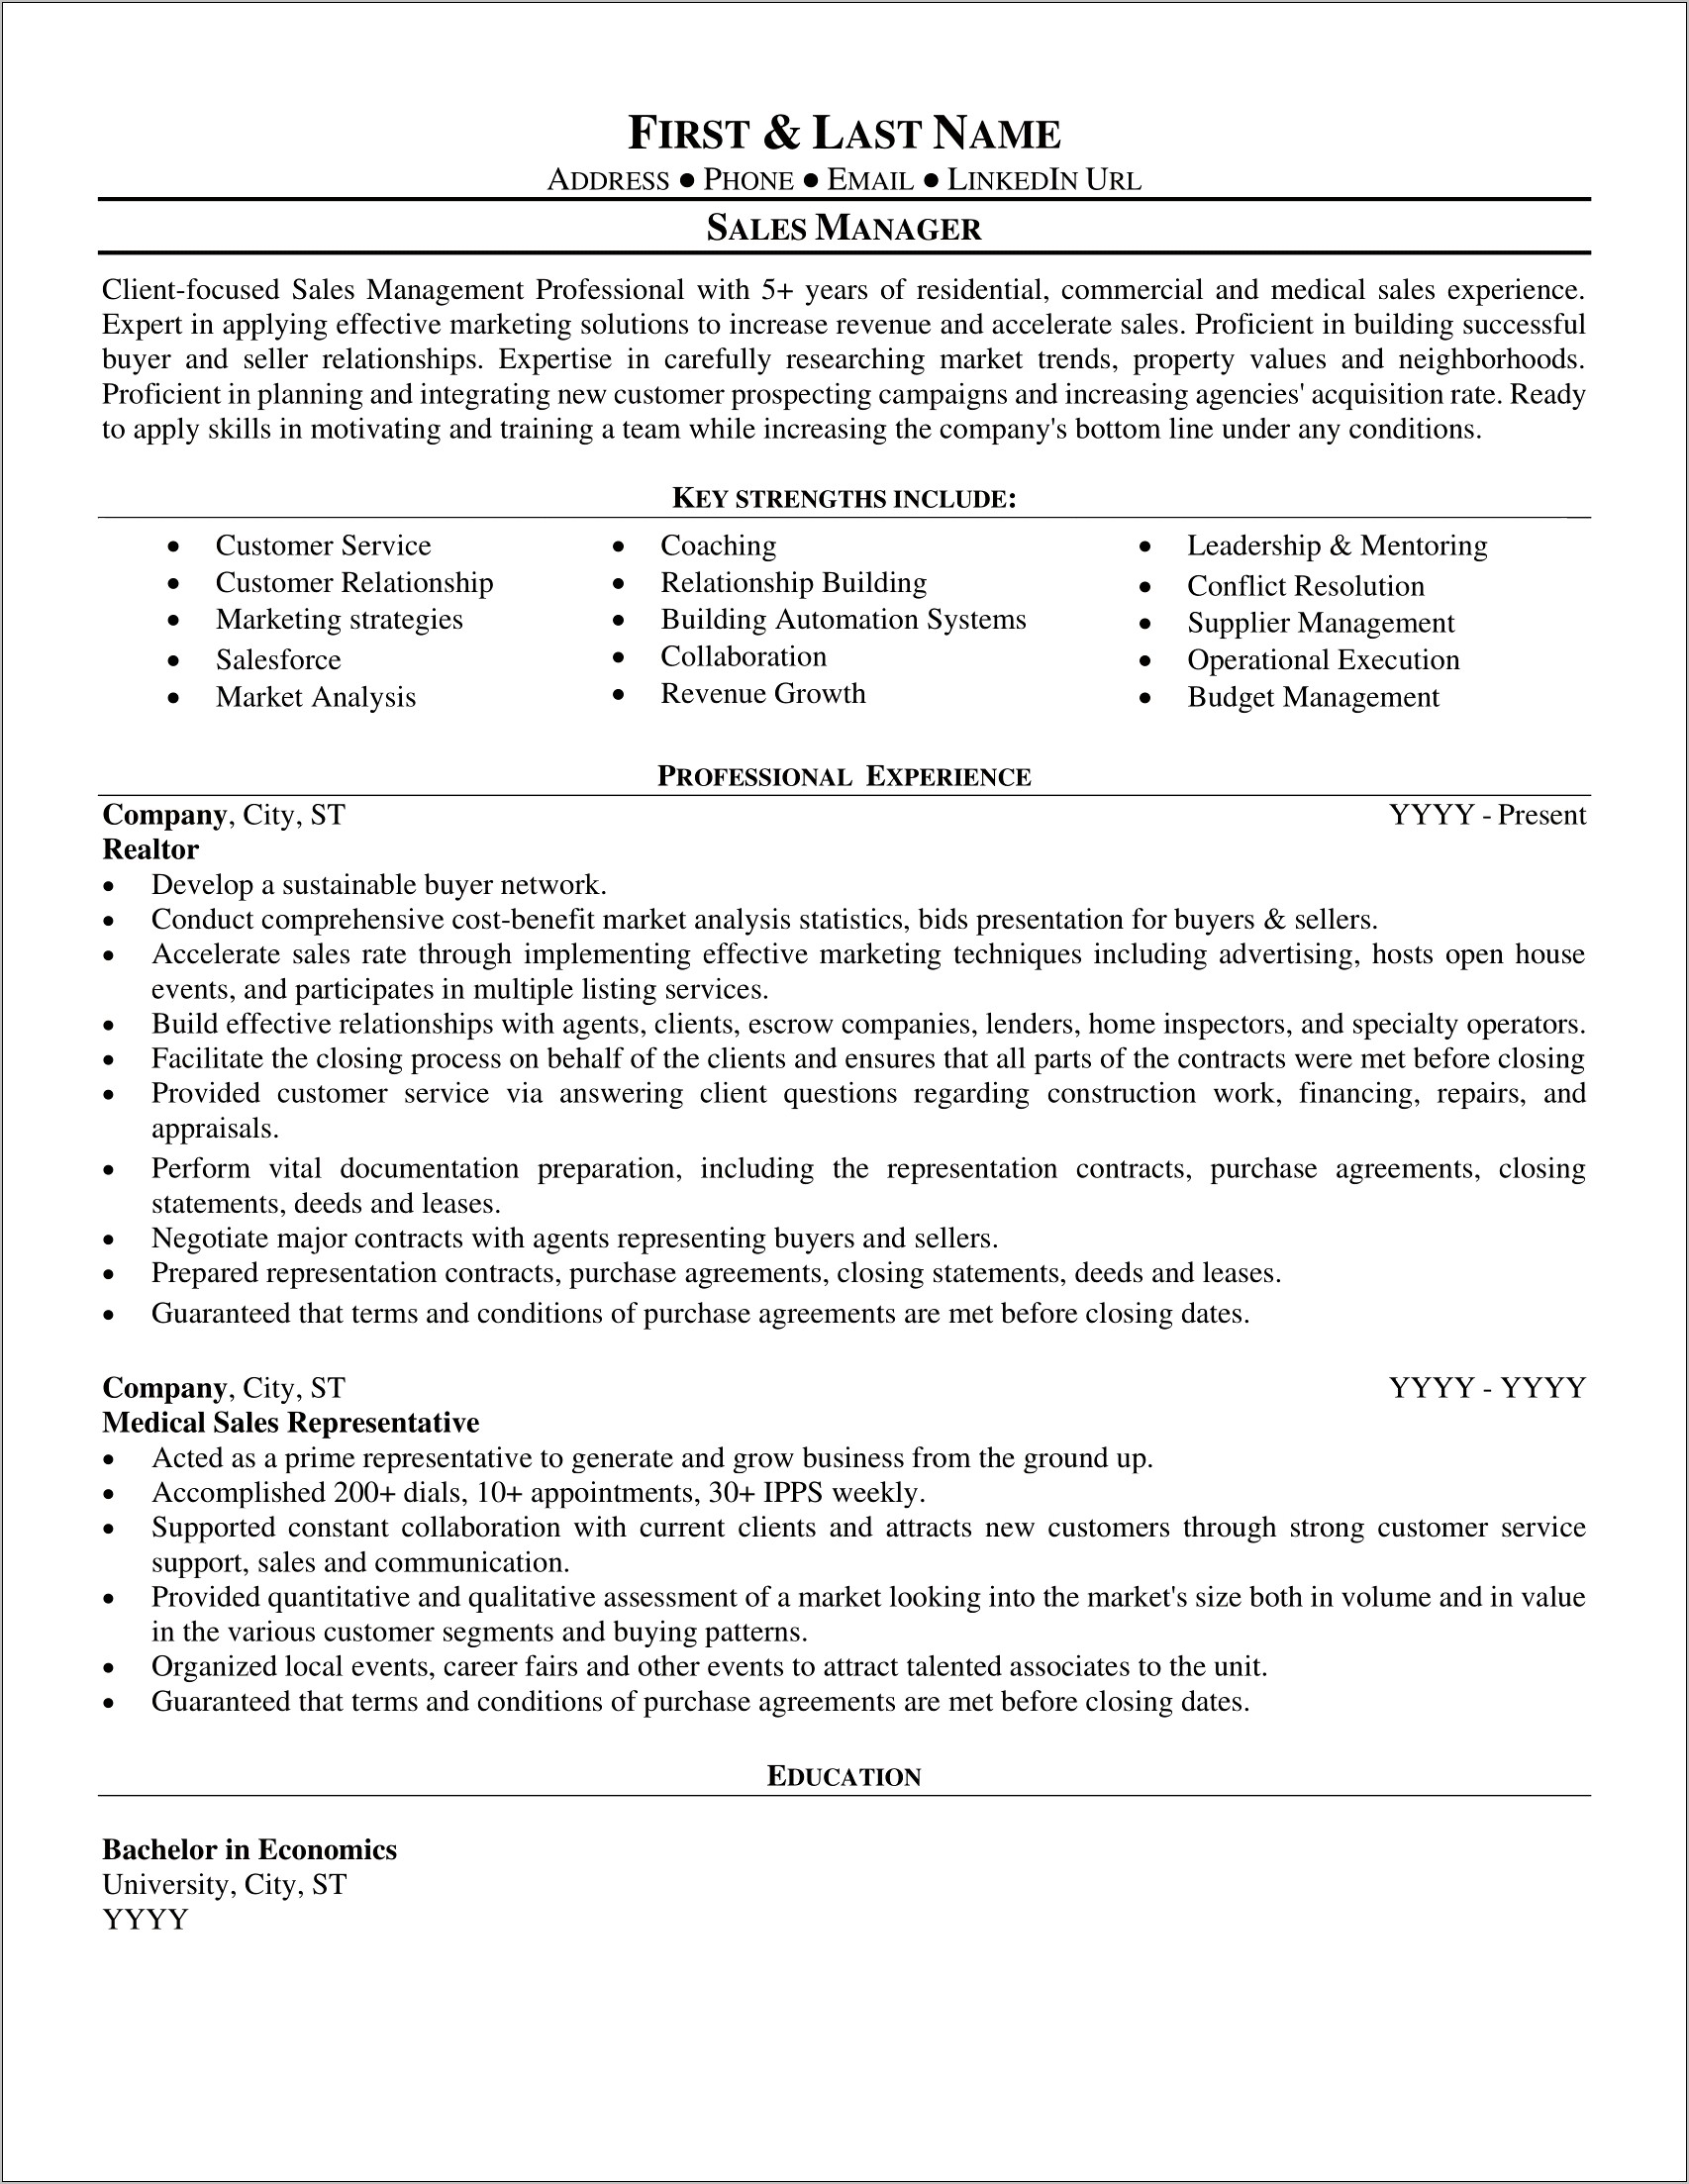 Customer Relationship Manager Resume Template